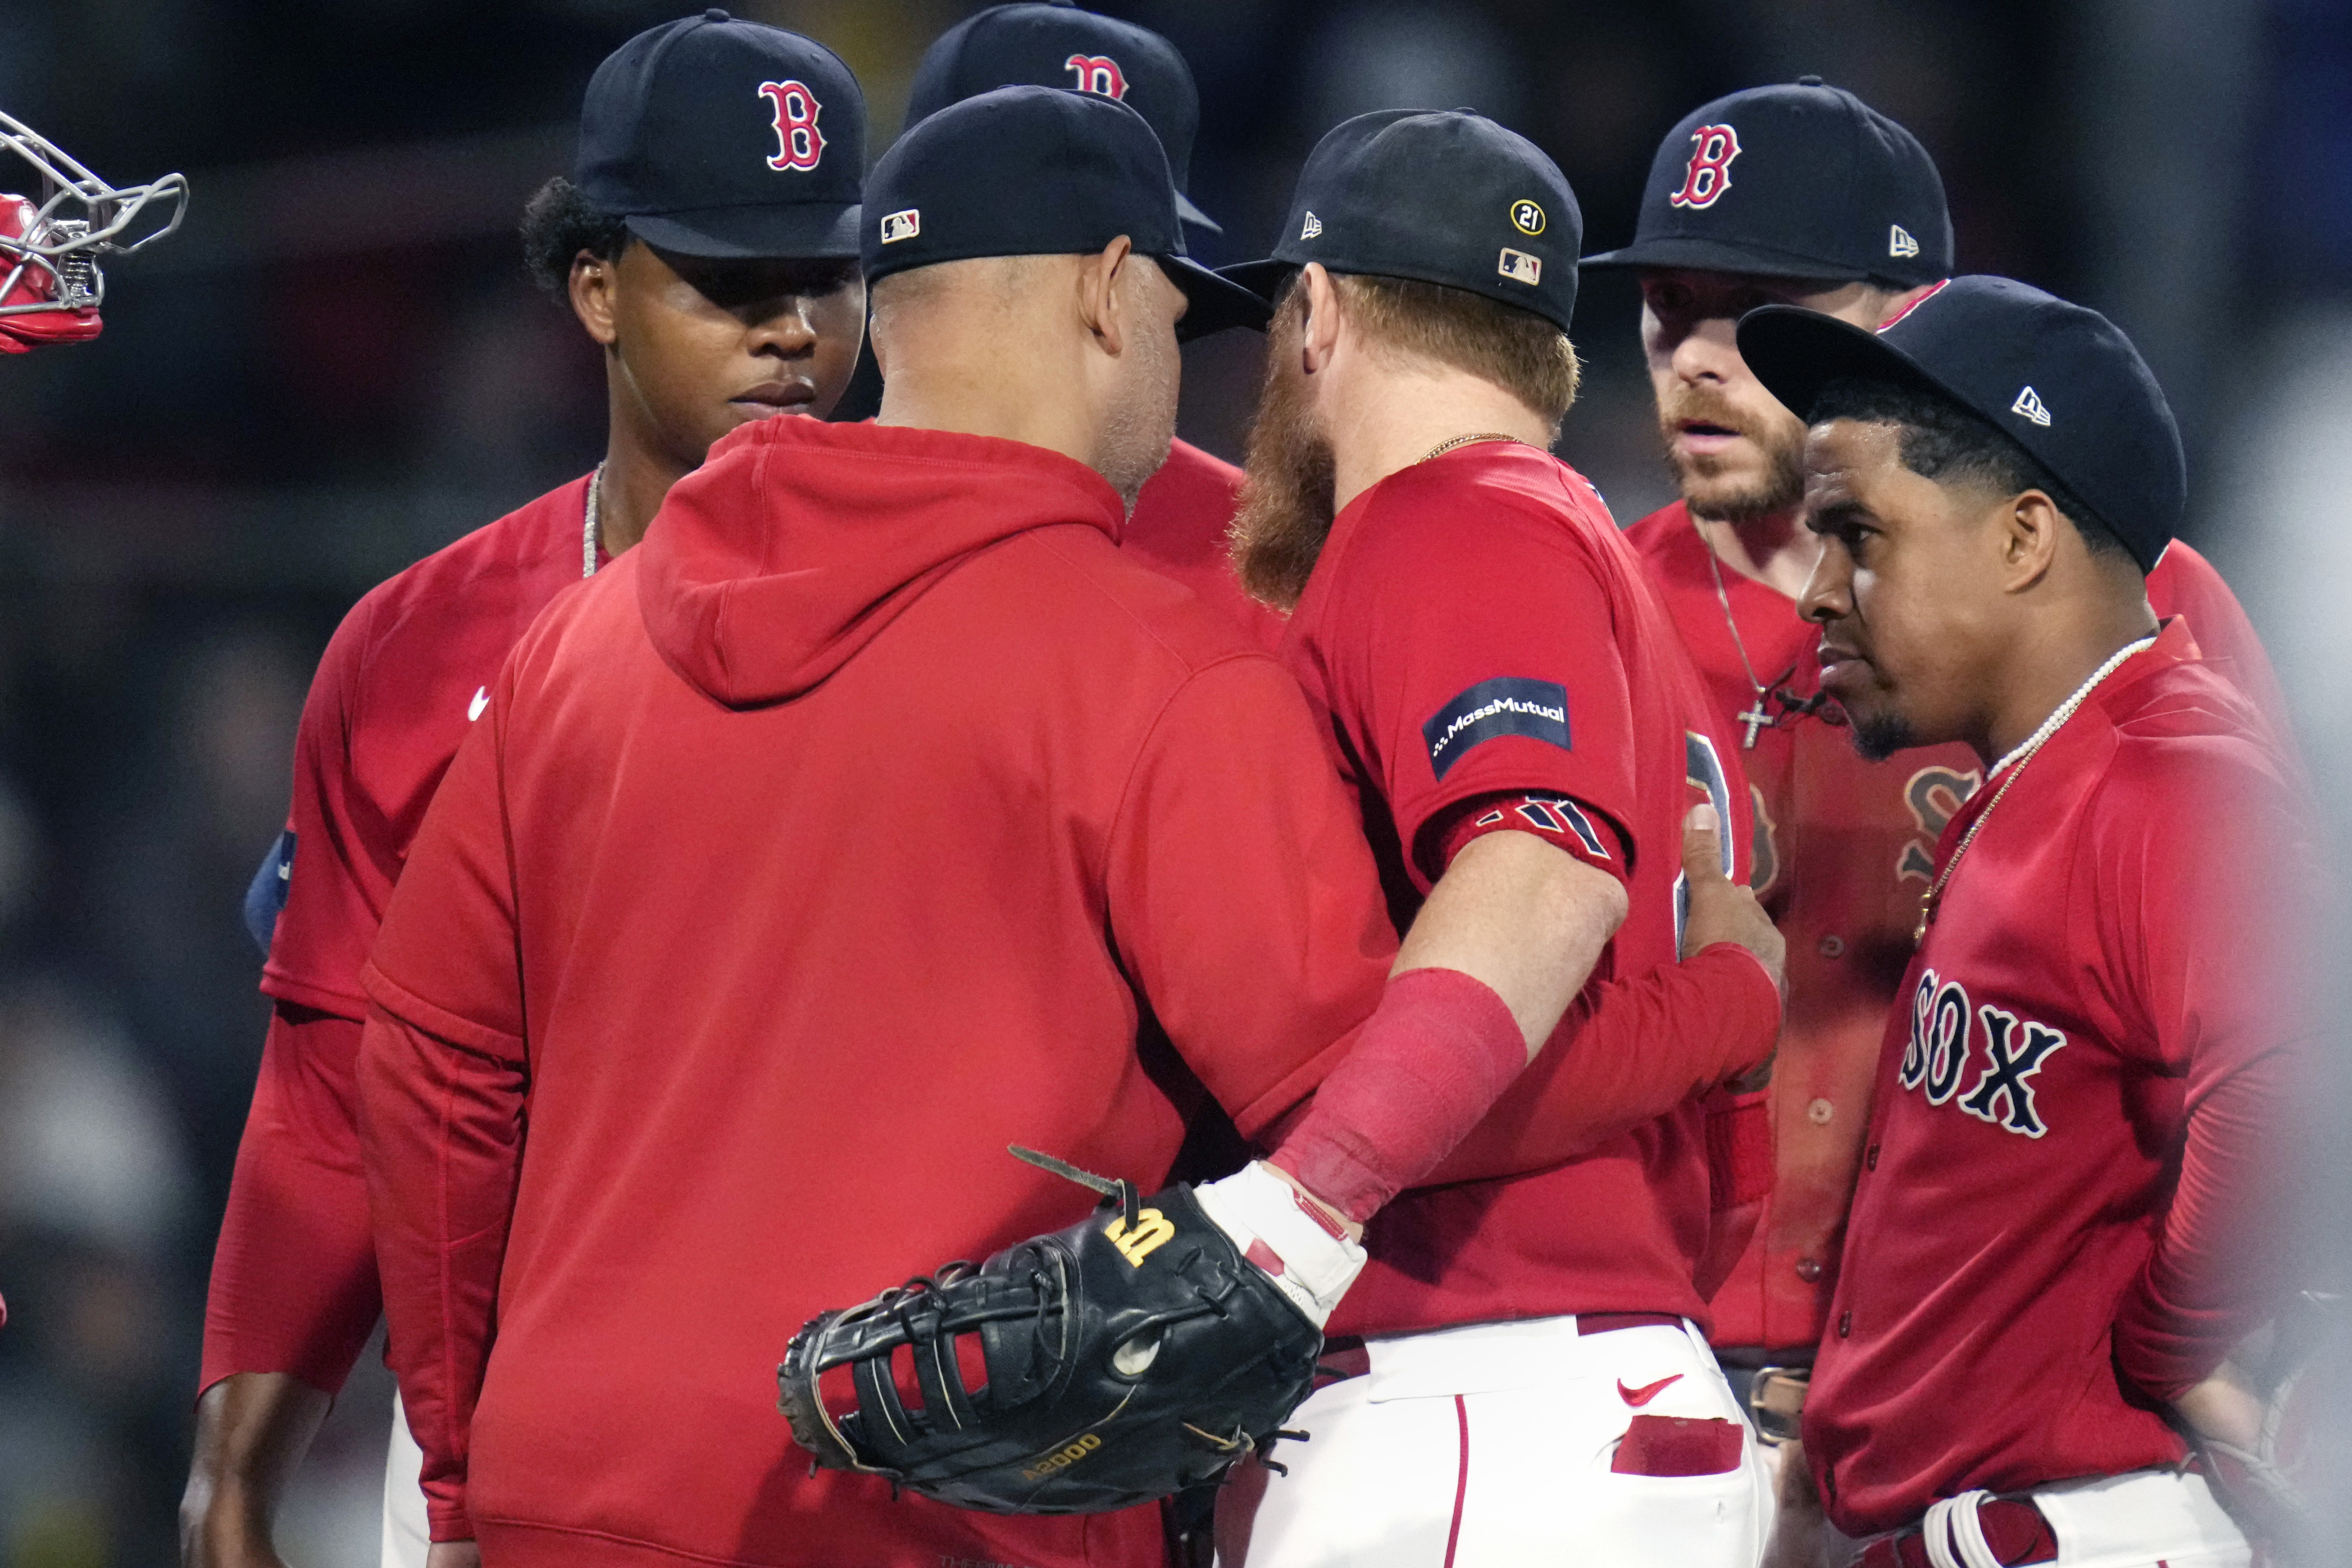 Alex Cora planned special exit to let Red Sox fans honor Justin